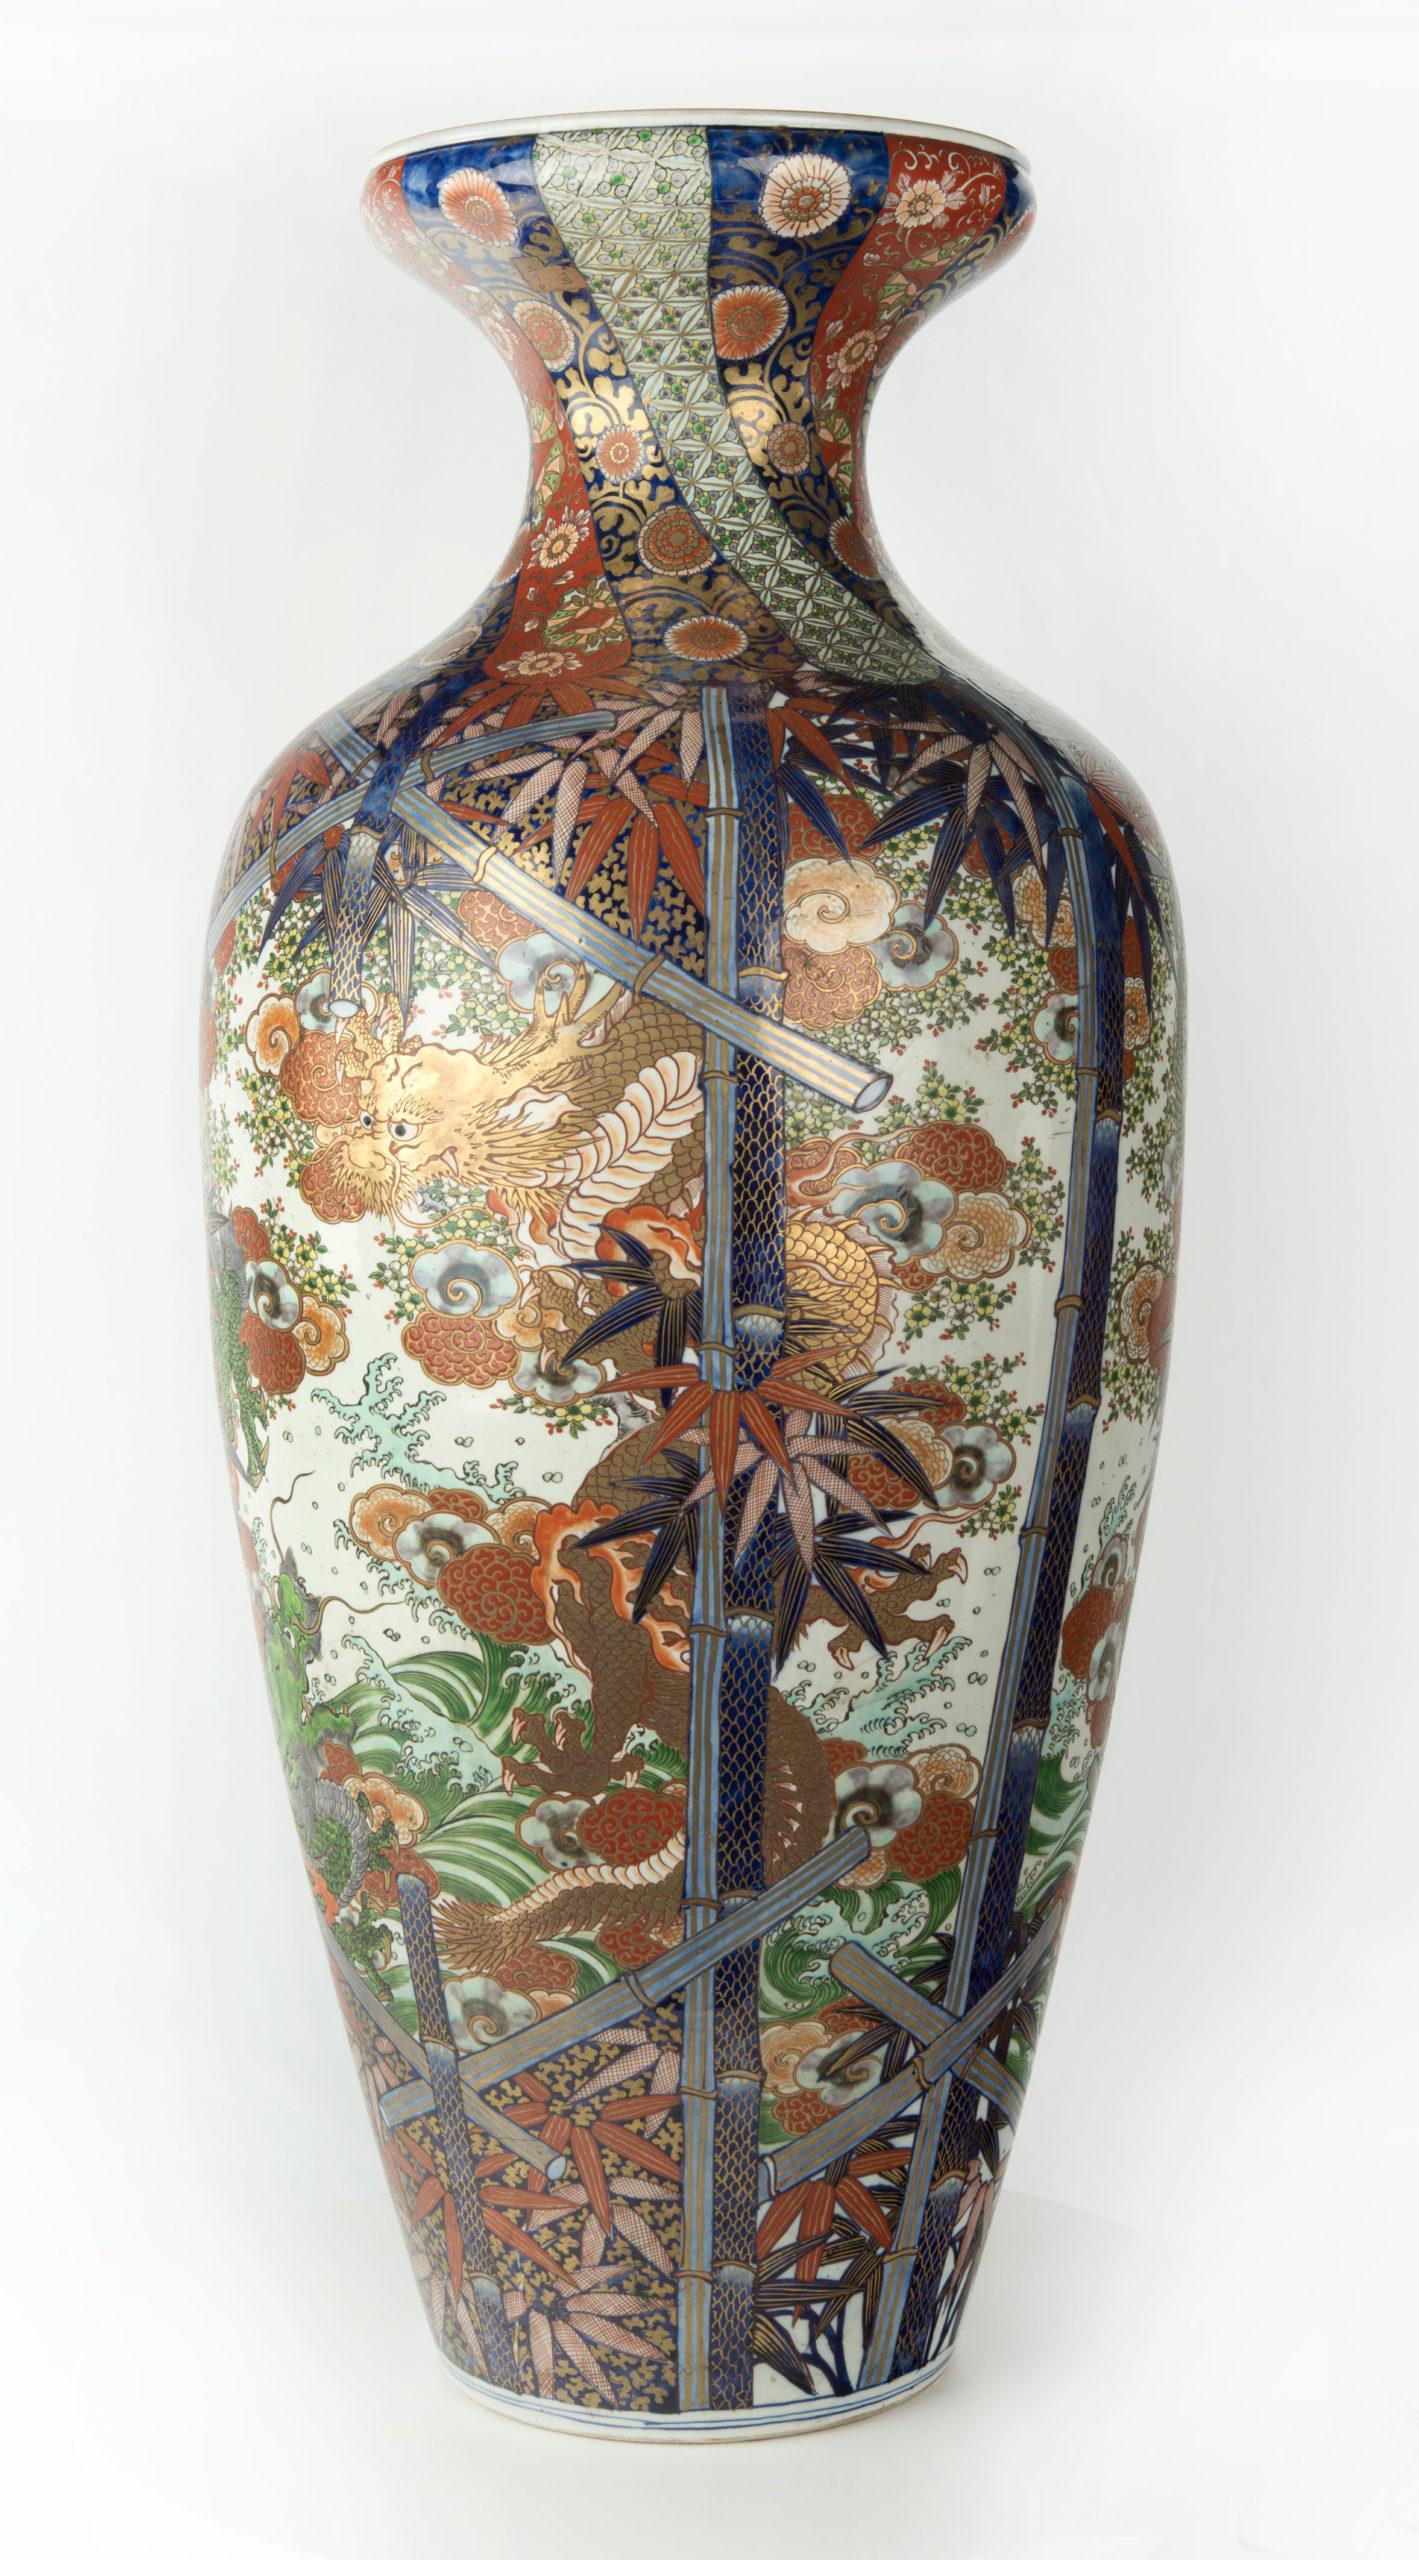 As part of our Japanese works of art collection we are delighted to offer this impressive floor standing Meiji Period 1868-1912 ceramic vase decorated in traditional Imari palette, the sumptuous decoration consists of a pair of opposing dragons